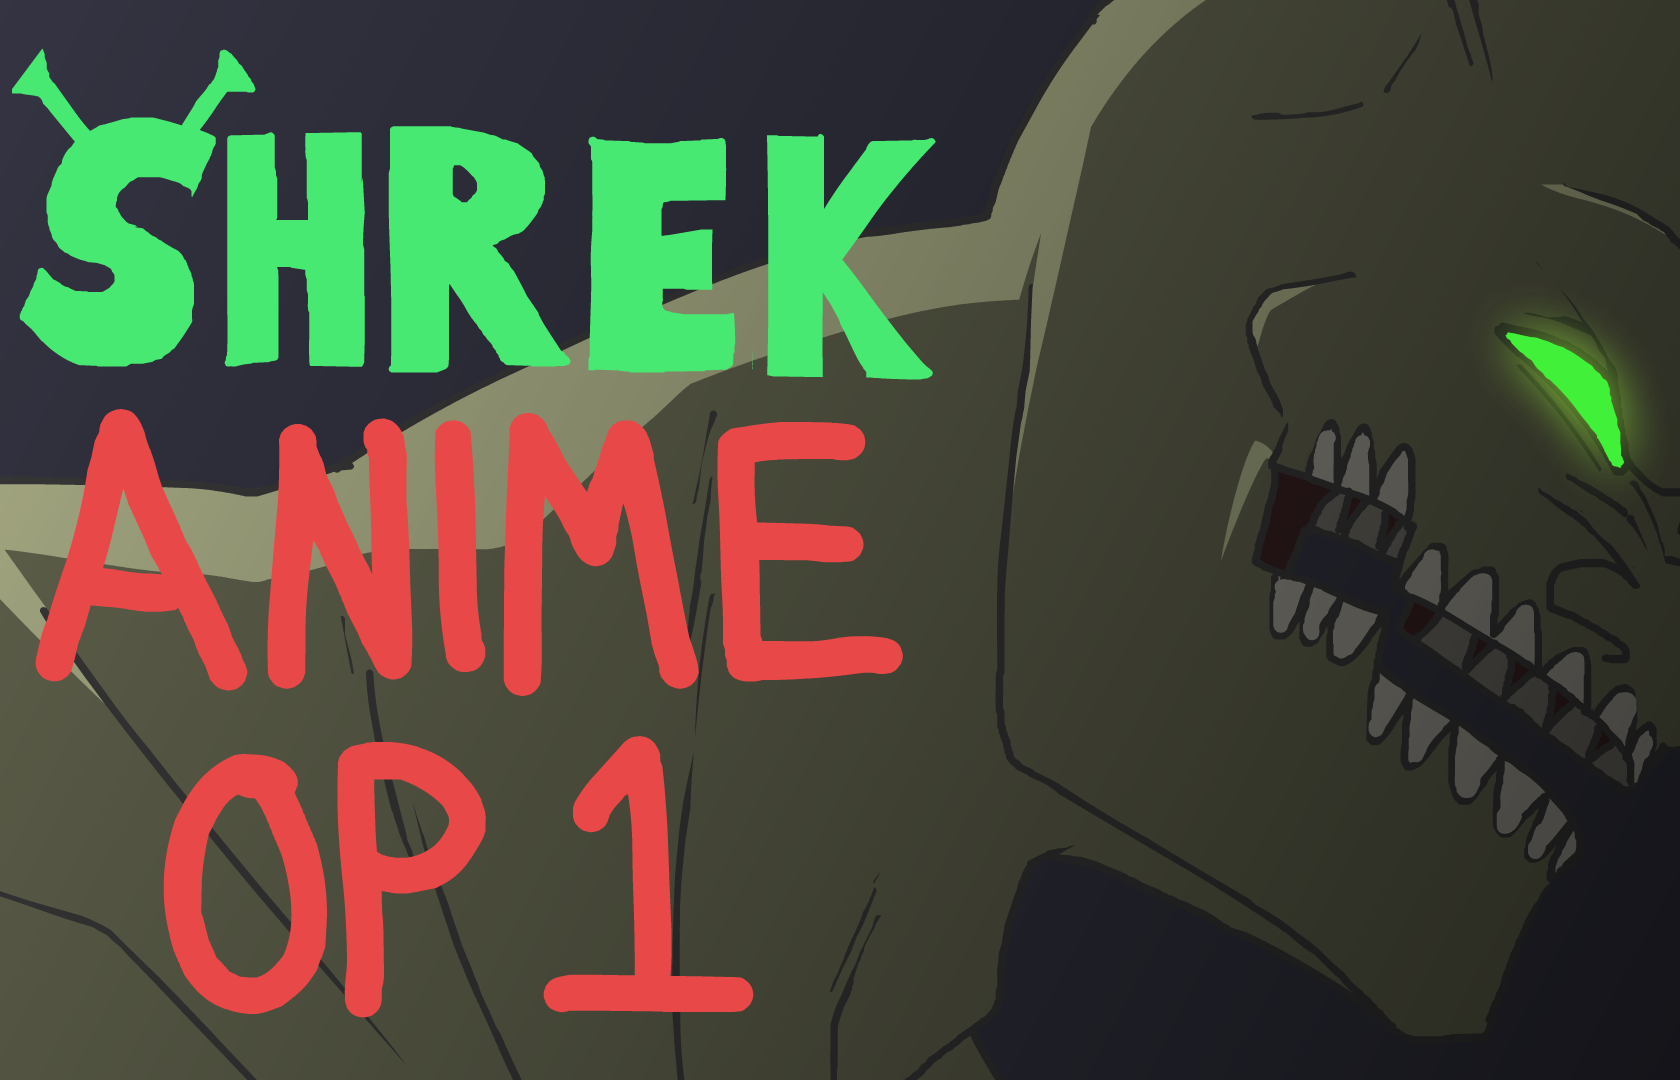 Attack On Ogre Shrek Anime Op - attack on titan roblox anime poster id